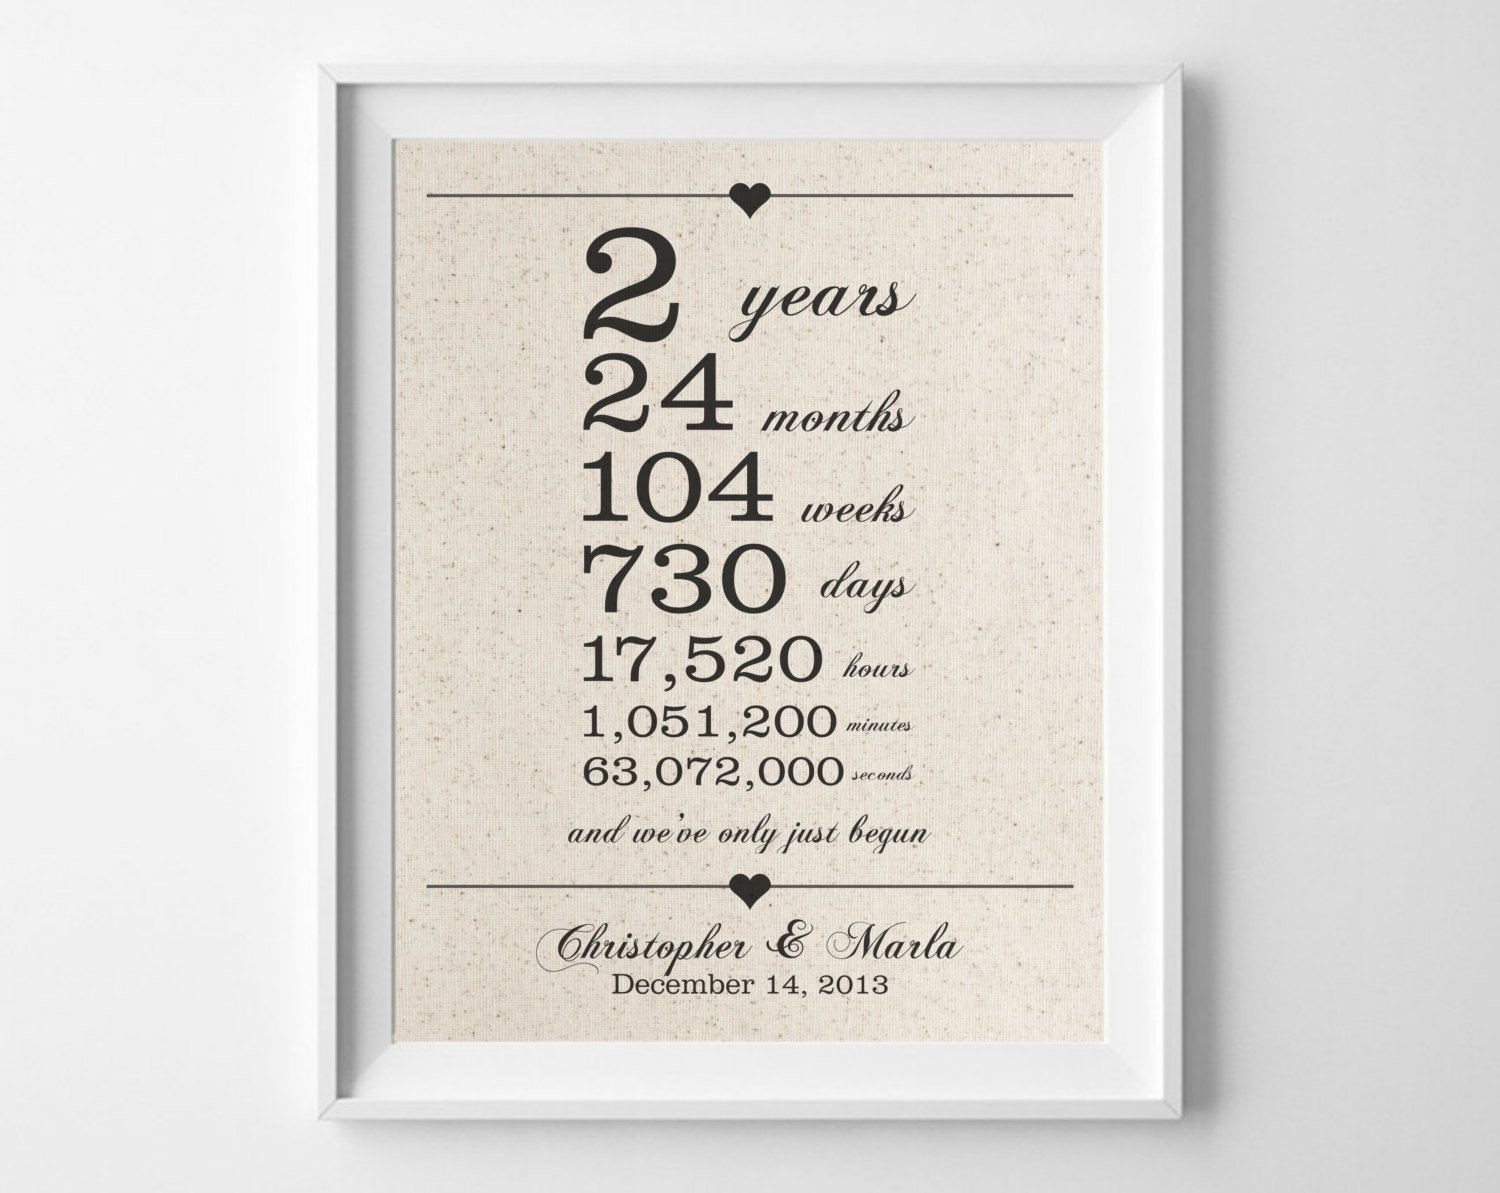 10 Cute Second Year Anniversary Gift Ideas For Her wedding gift best 19th wedding anniversary gift ideas for her your 2022